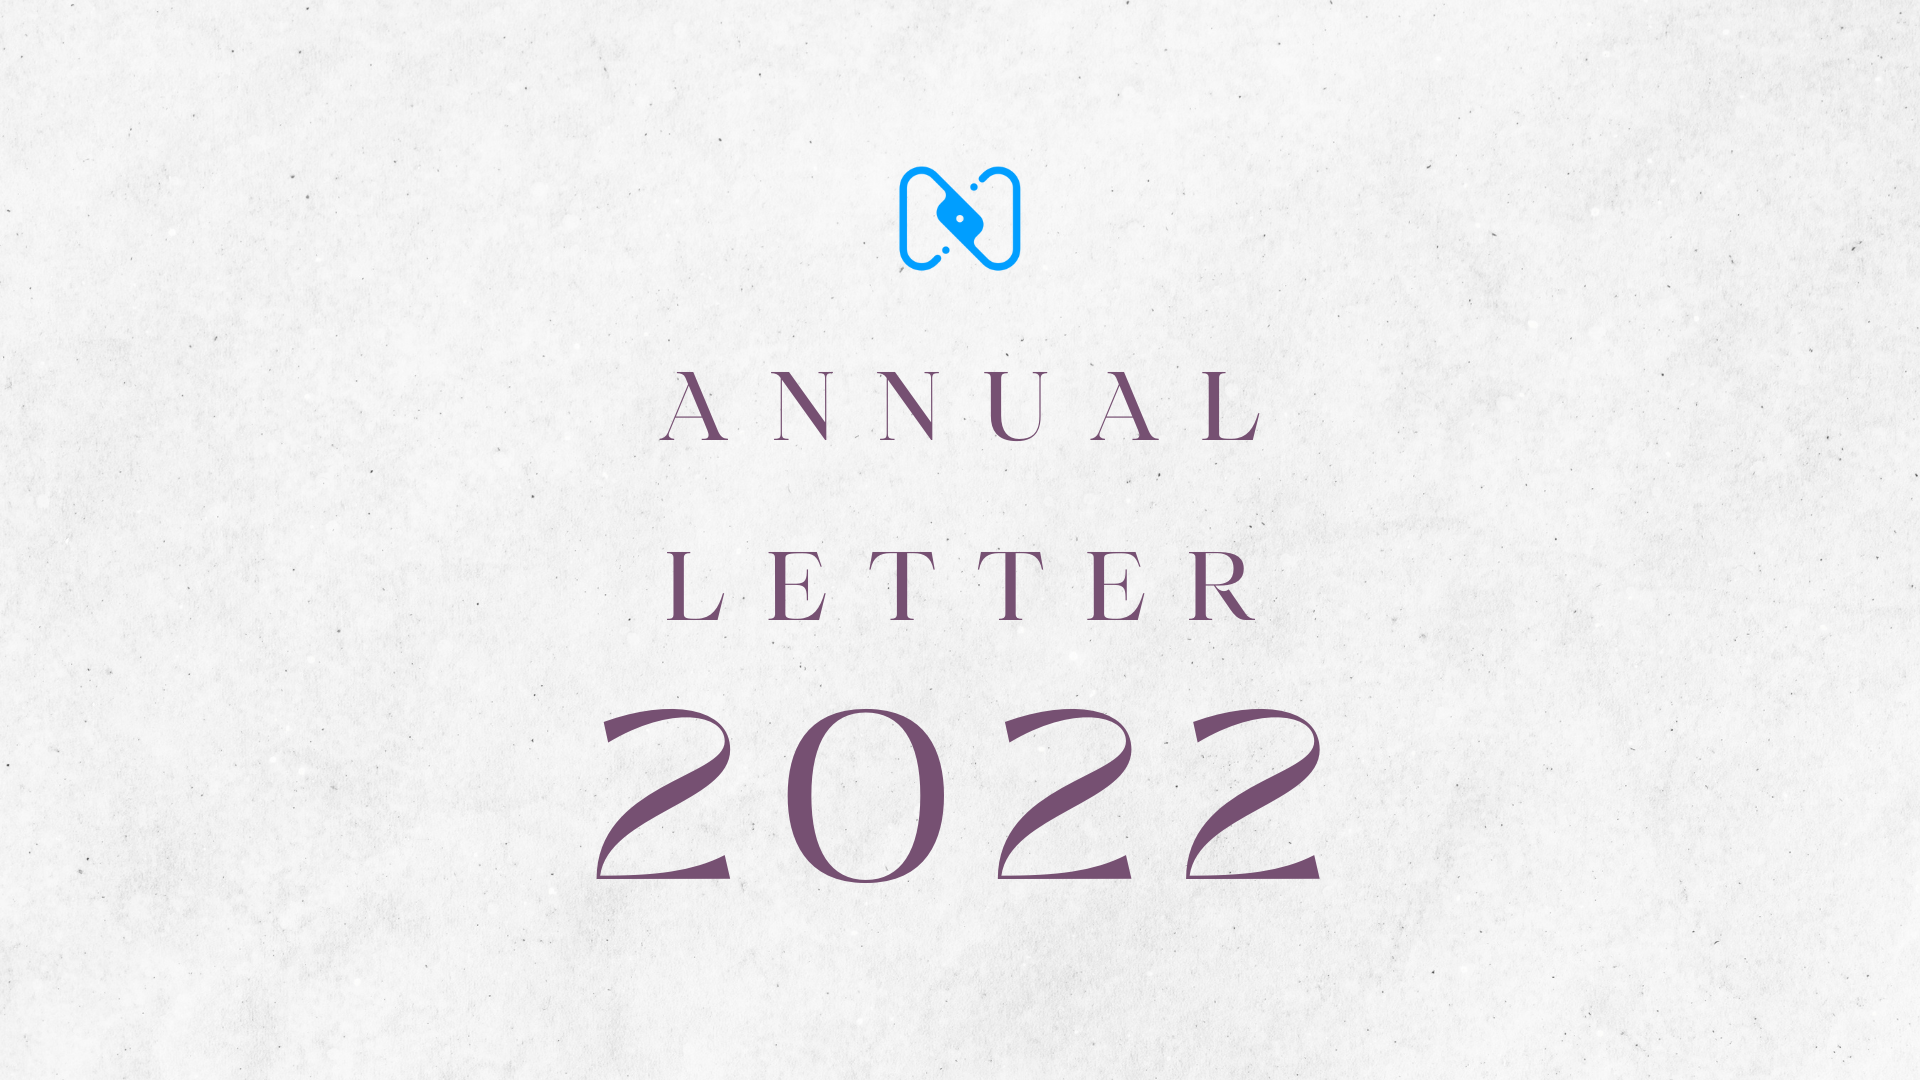 Nuclei's Annual Letter 2022